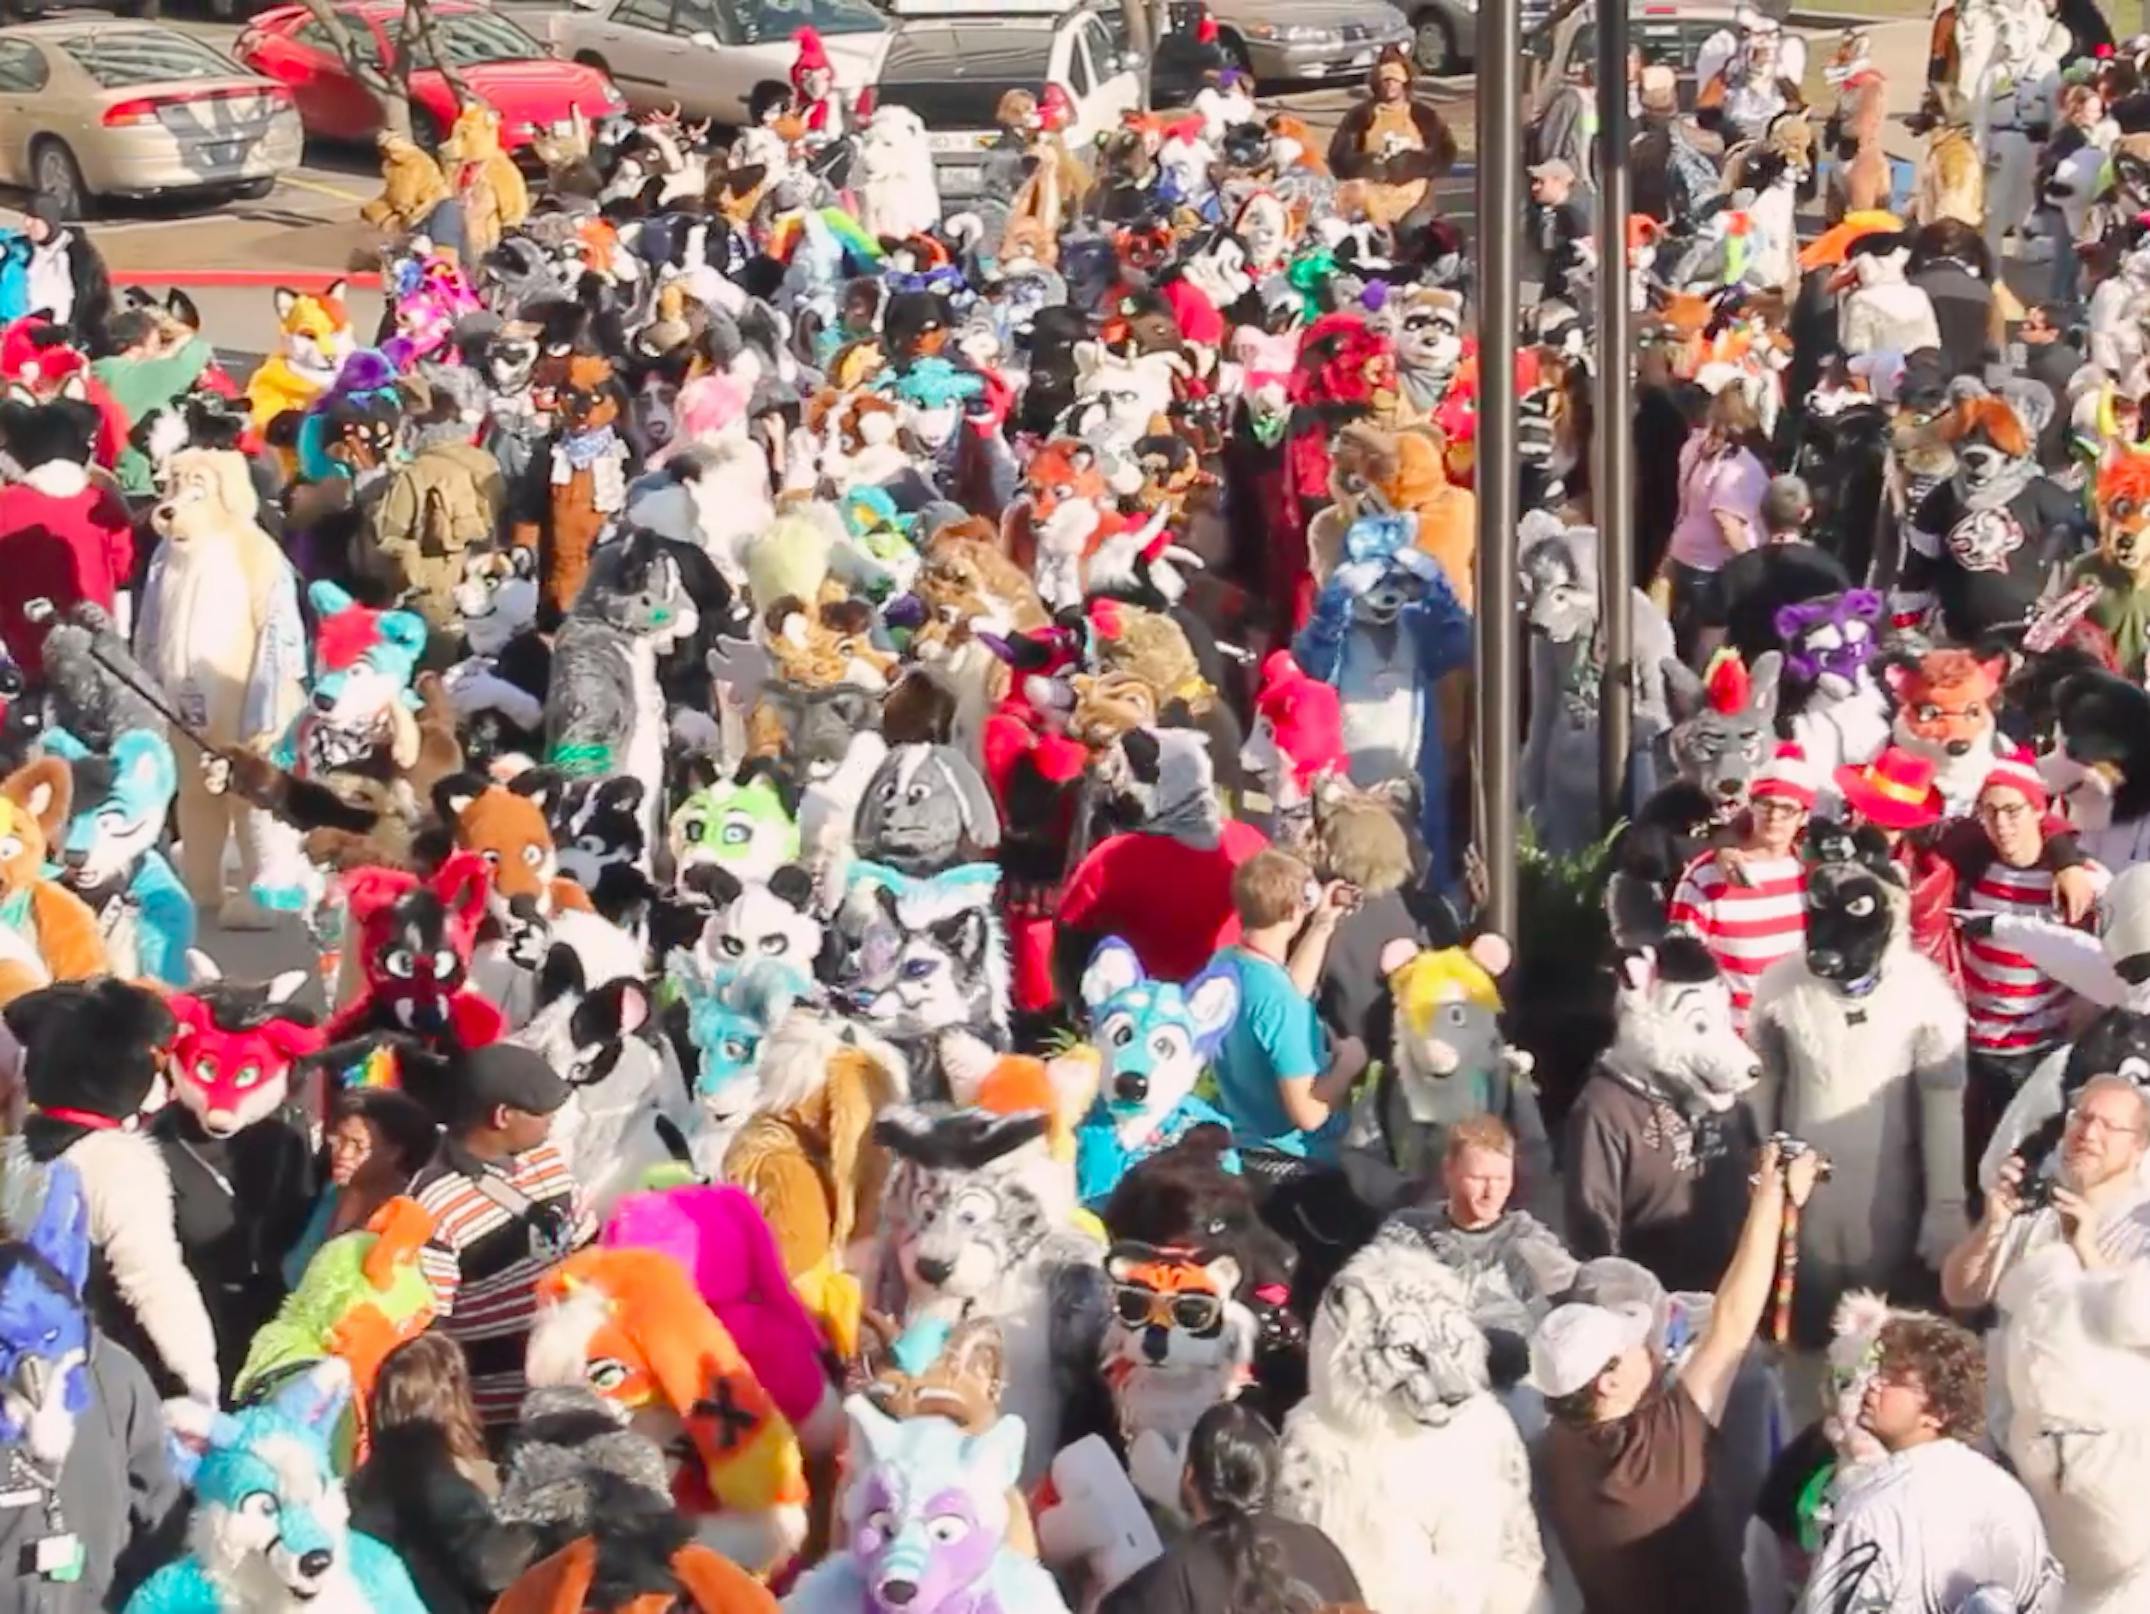 Furries Sex Convention - Fursonas' Documentary Illuminates the Beauty and Anger In ...